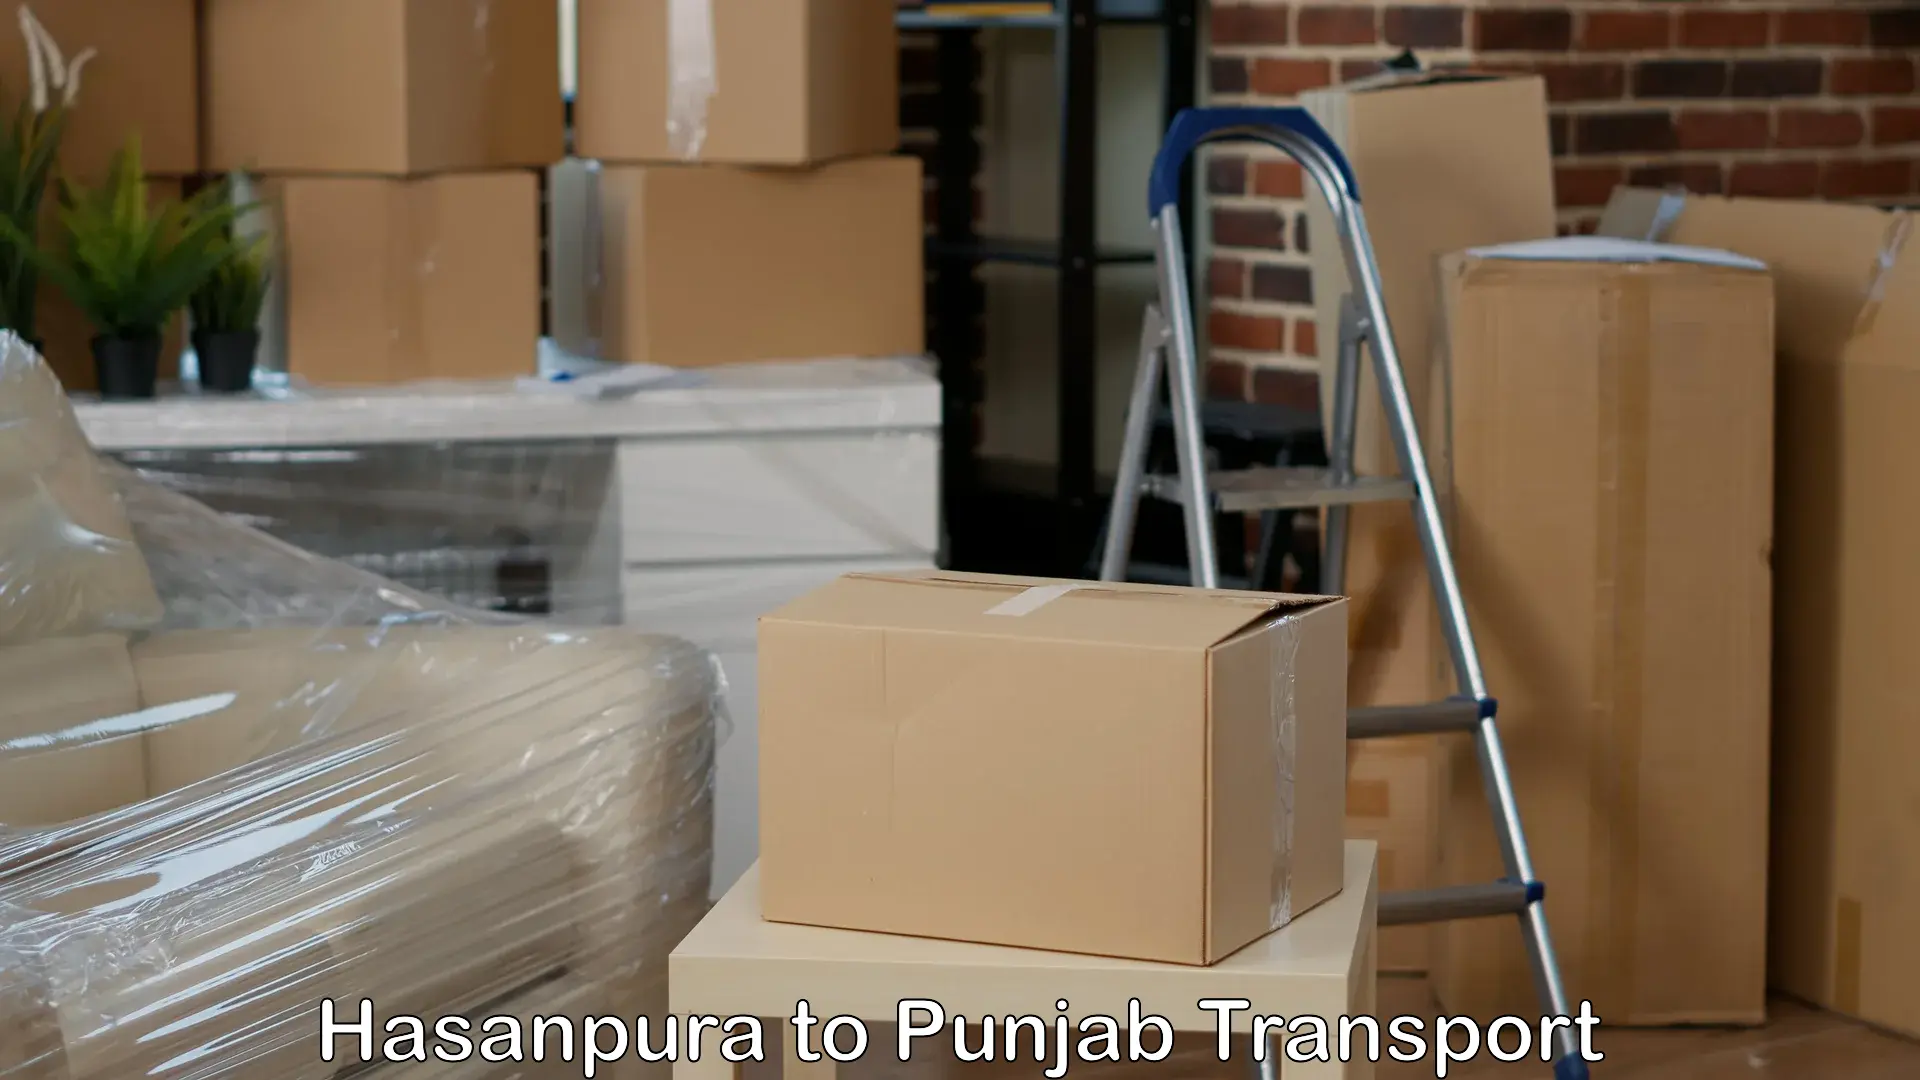 Transport services in Hasanpura to Amritsar